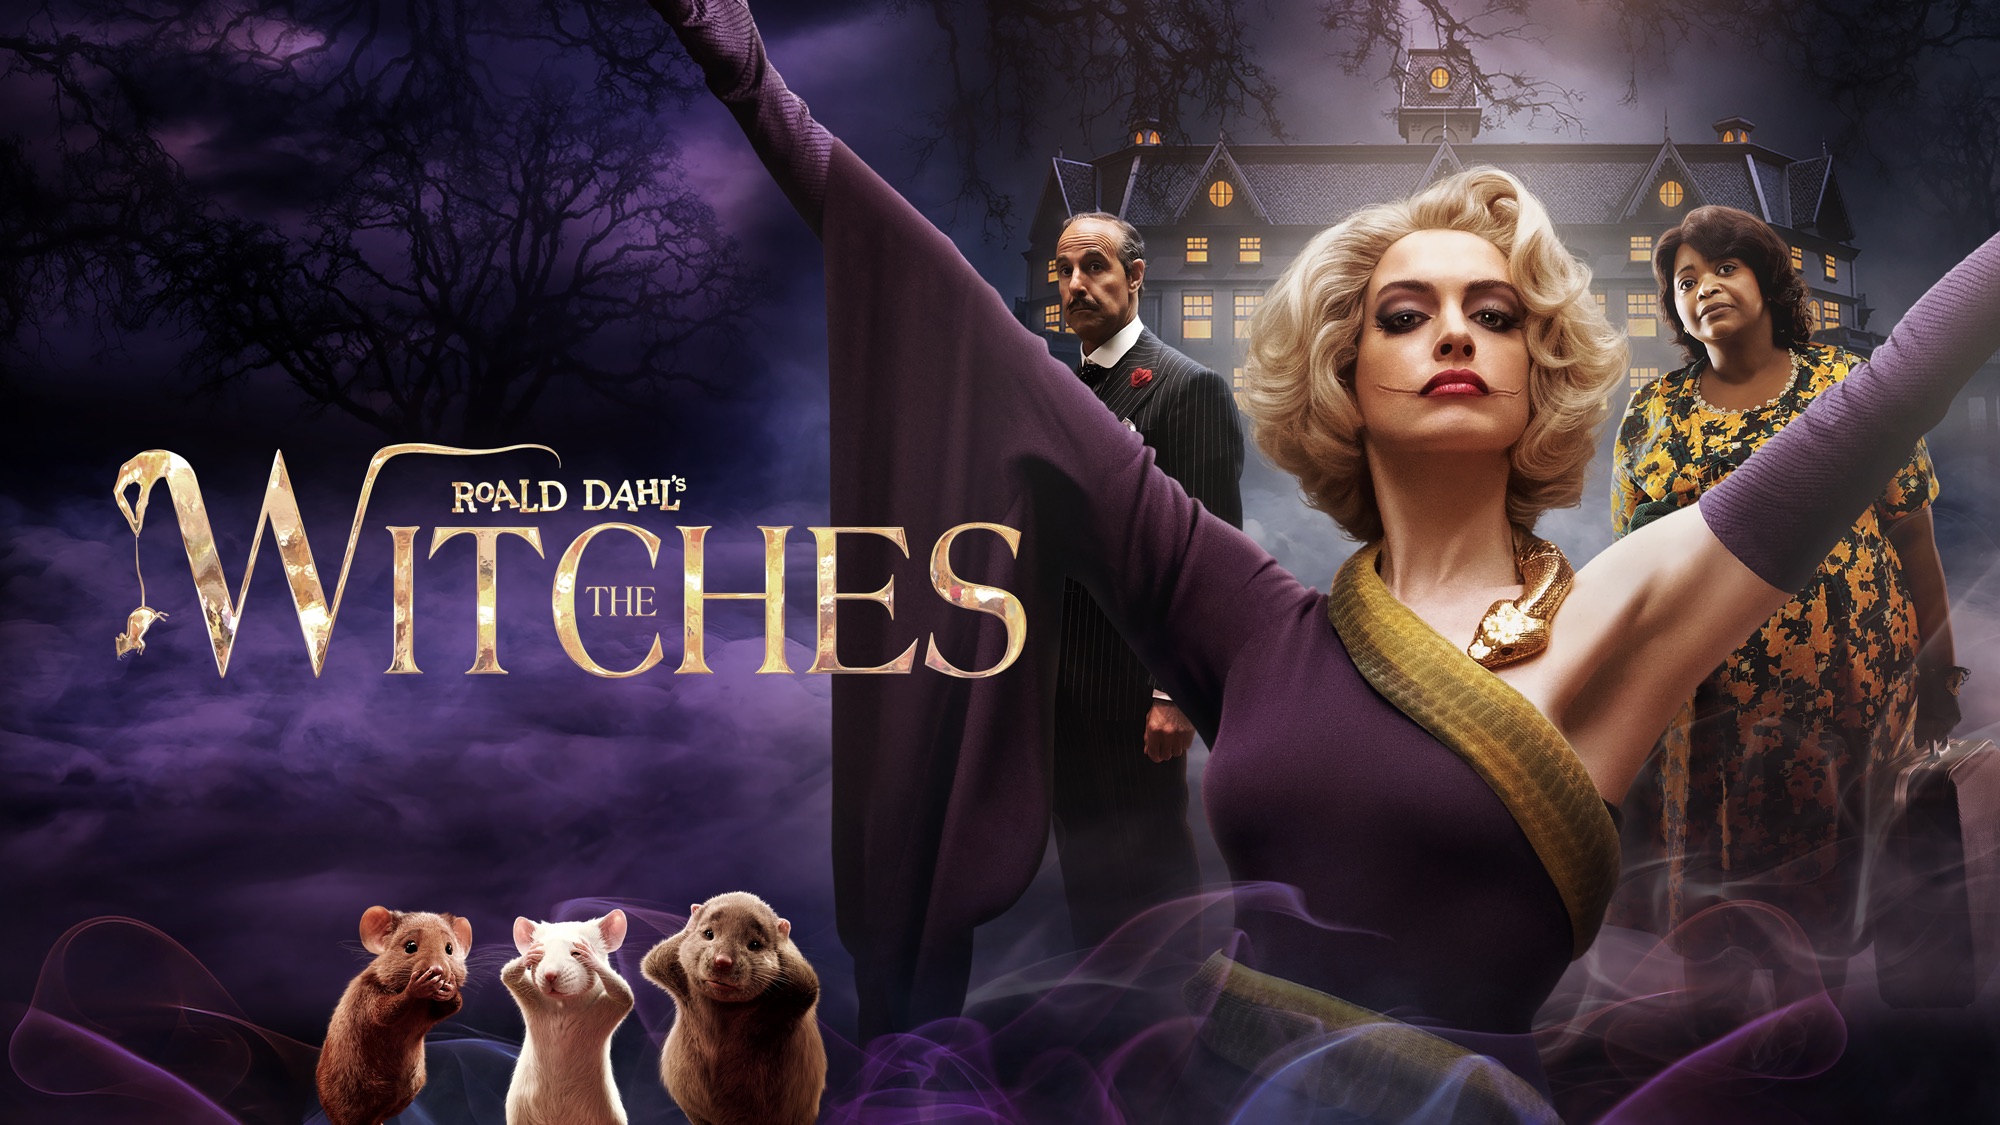 Movie The Witches (2020) HD Wallpaper | Background Image